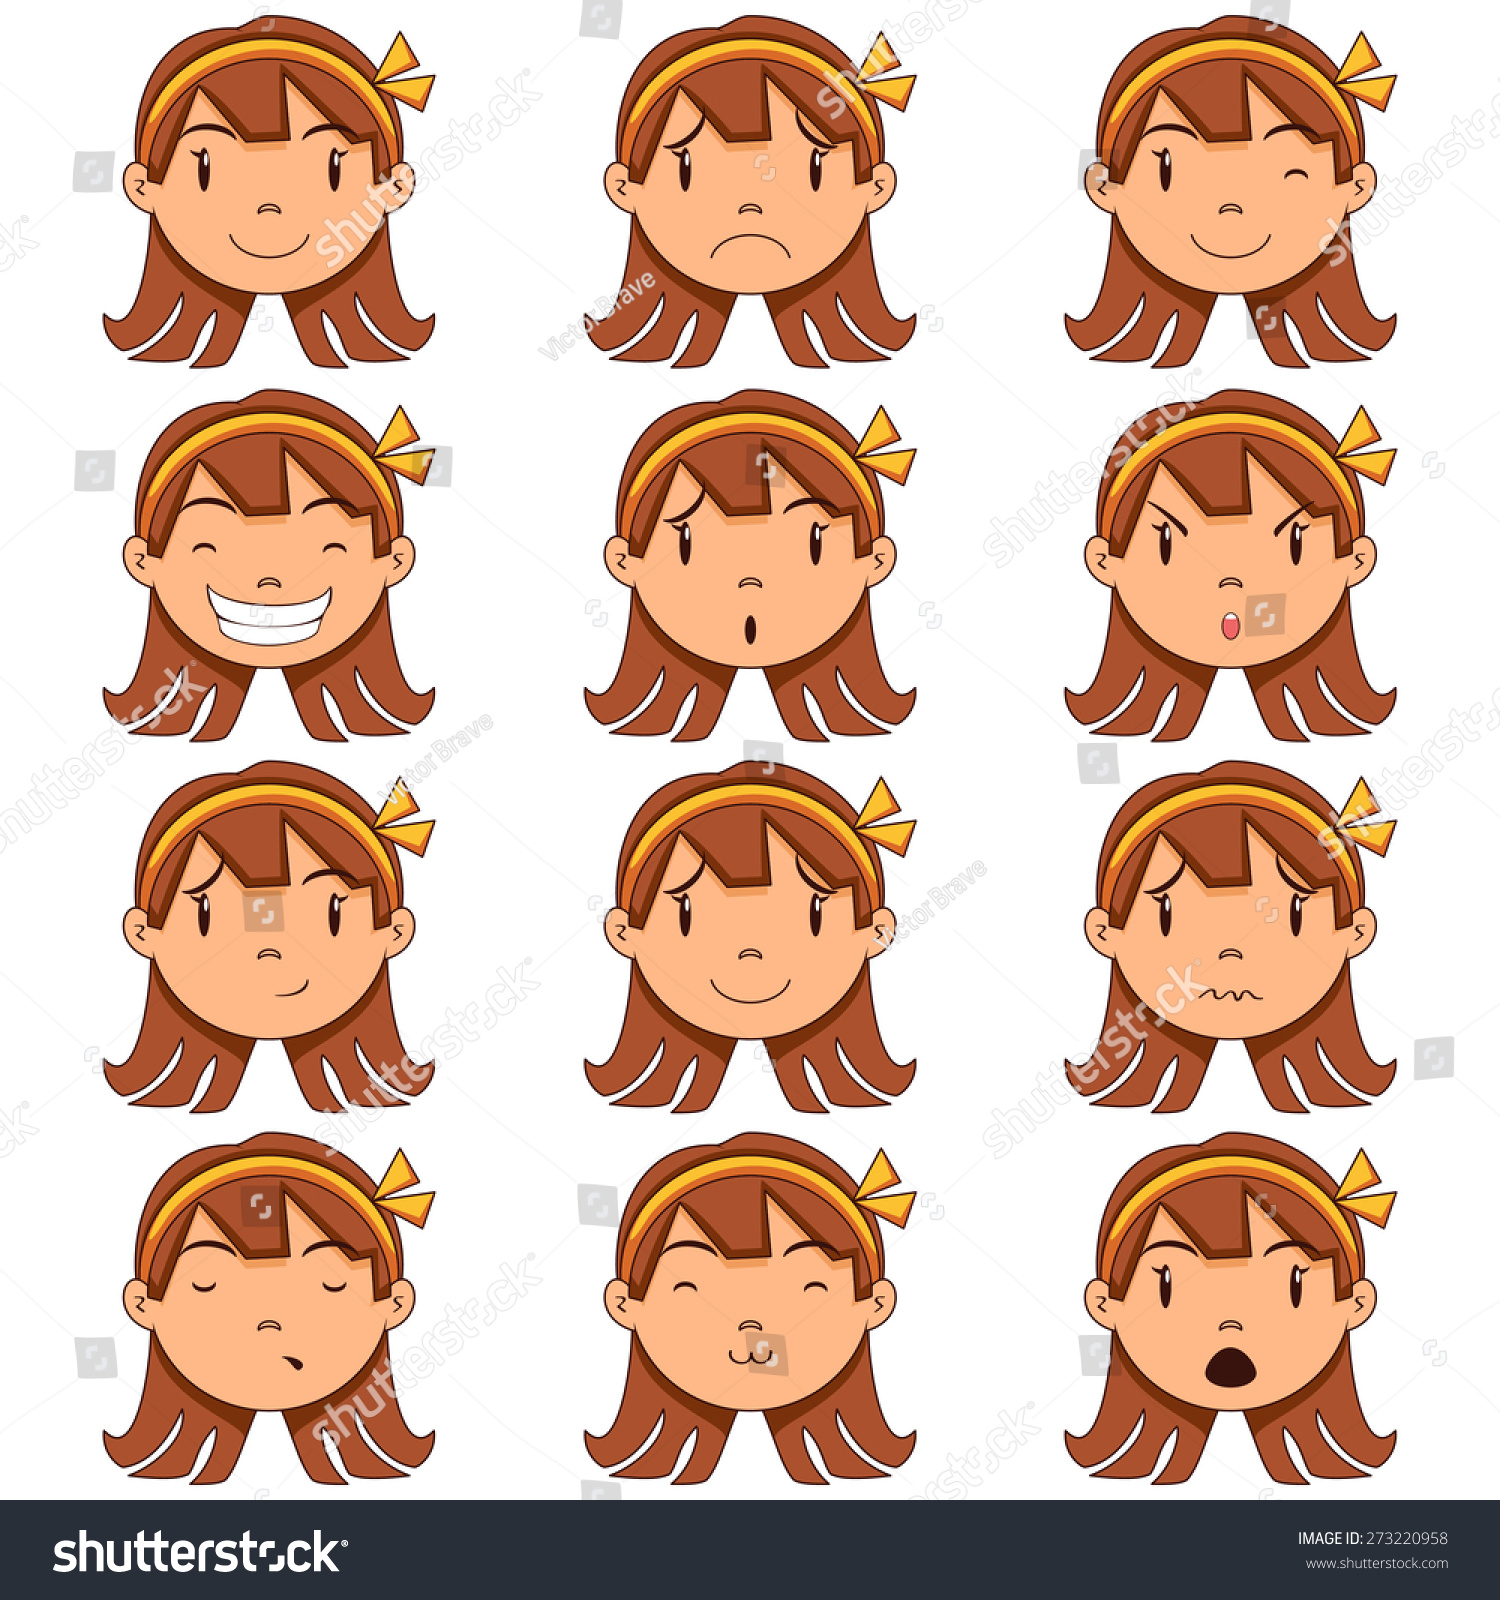 Girl Face Expressions Vector Illustration Set Stock Vector 273220958 ...